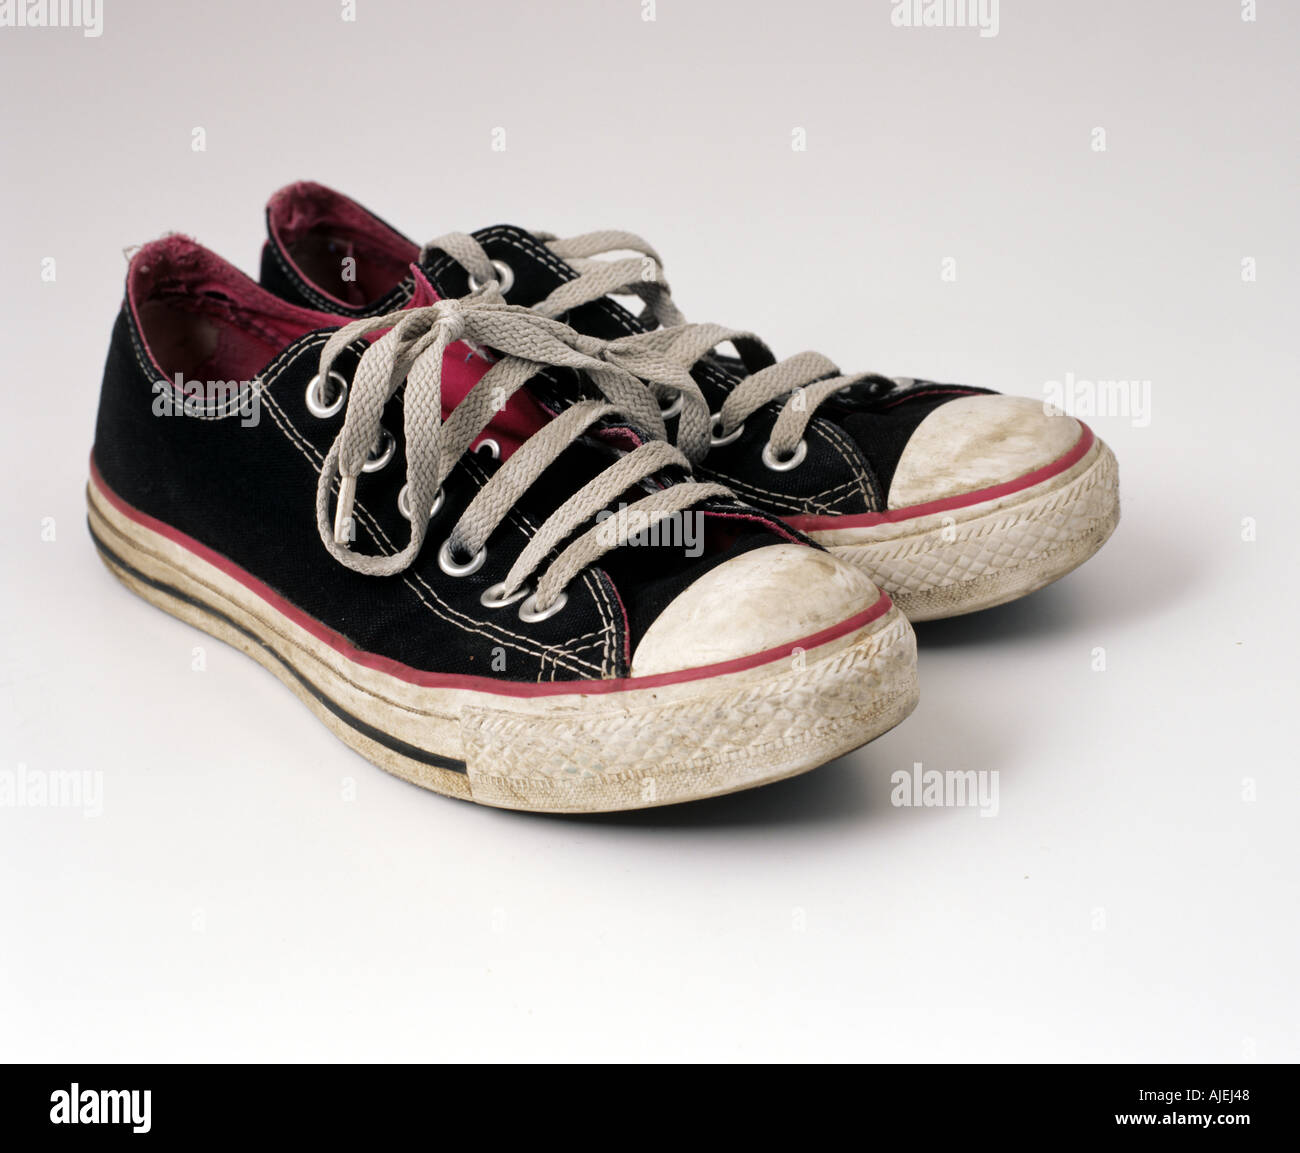 Sneakers or Plimsoles Stock Photo - Alamy